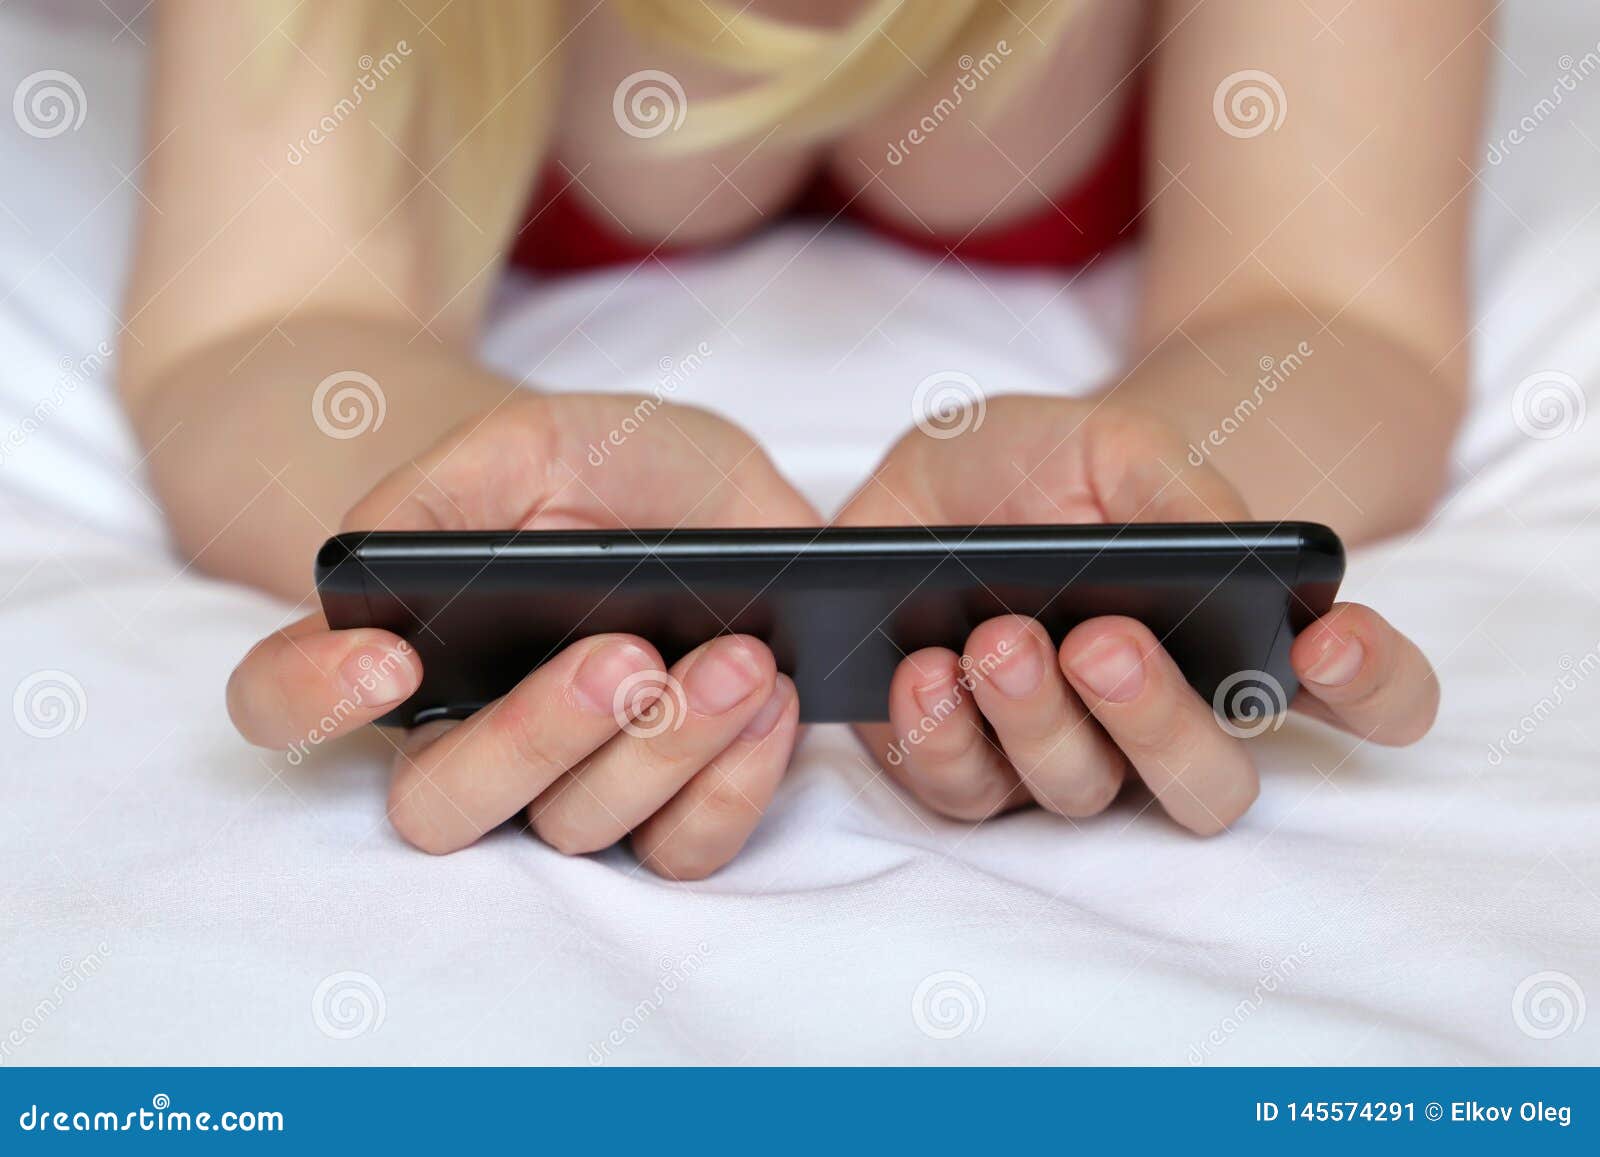 Blonde Woman Watching Video on Smartphone, Girl in Negligee Lying on the Bed Stock Image picture